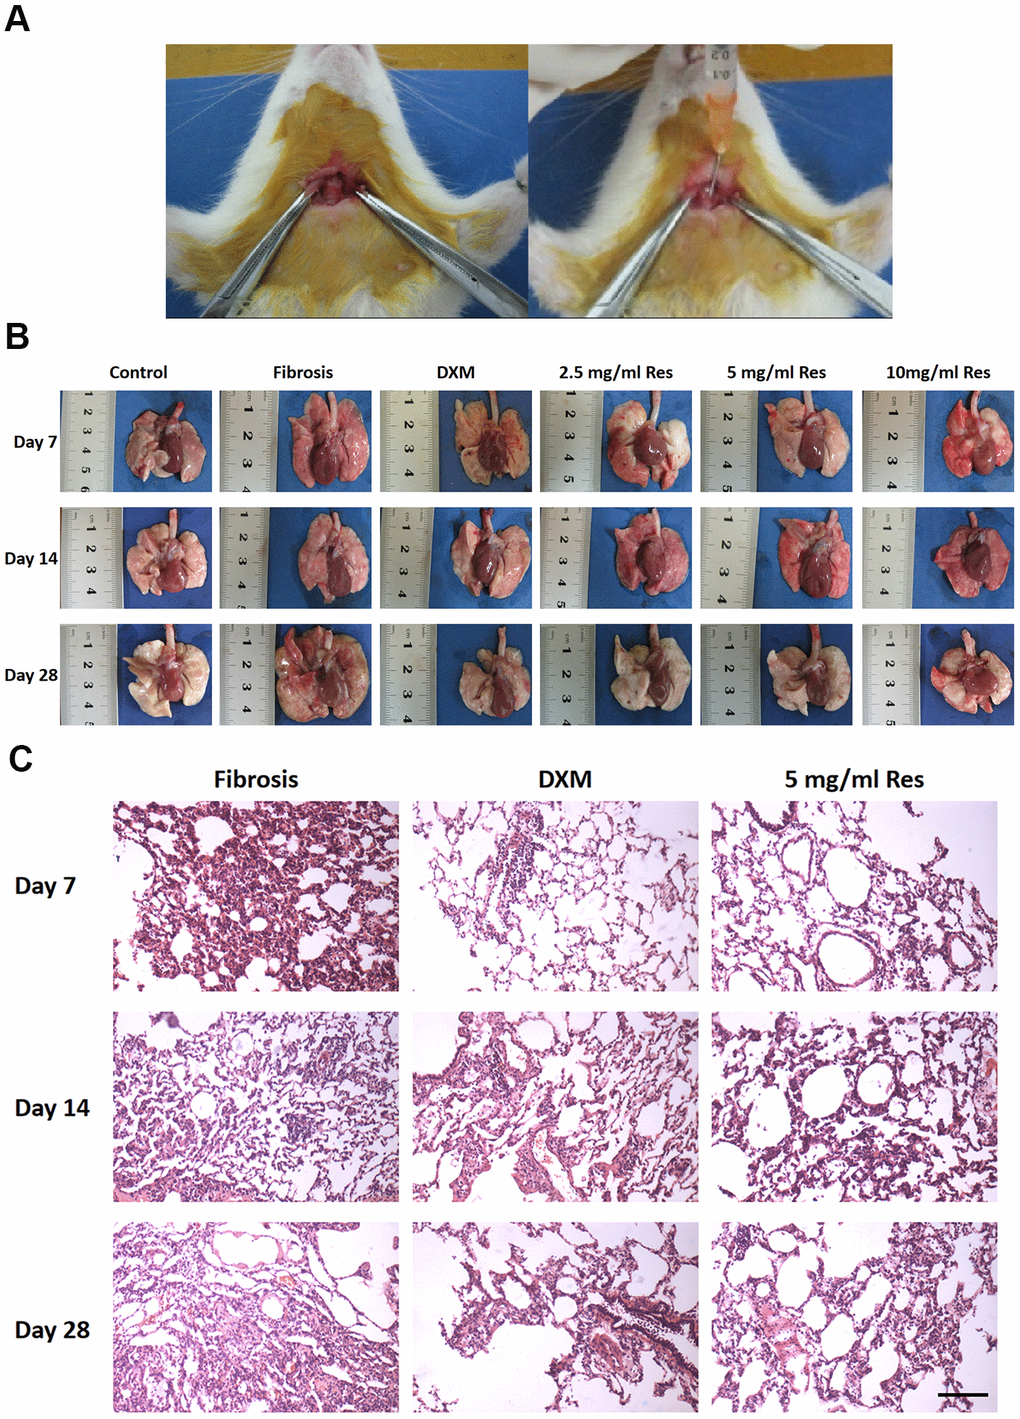 Resveratrol reverses bleomycin-induced pulmonary fibrosis in vivo. (A) Administration of resveratrol to establish bleomycin-induced pulmonary fibrosis model in rat. (B) Gross views of the lungs on days 7, 14, and 28 following different treatments. Data are expressed as mean ± standard deviation (SD) of three independent experiments. *p p p p C) The results of hematoxylin and eosin (H&E) staining of samples obtained from the lungs on days 7, 14, and 28 following different treatments (scale bar = 200 μm).